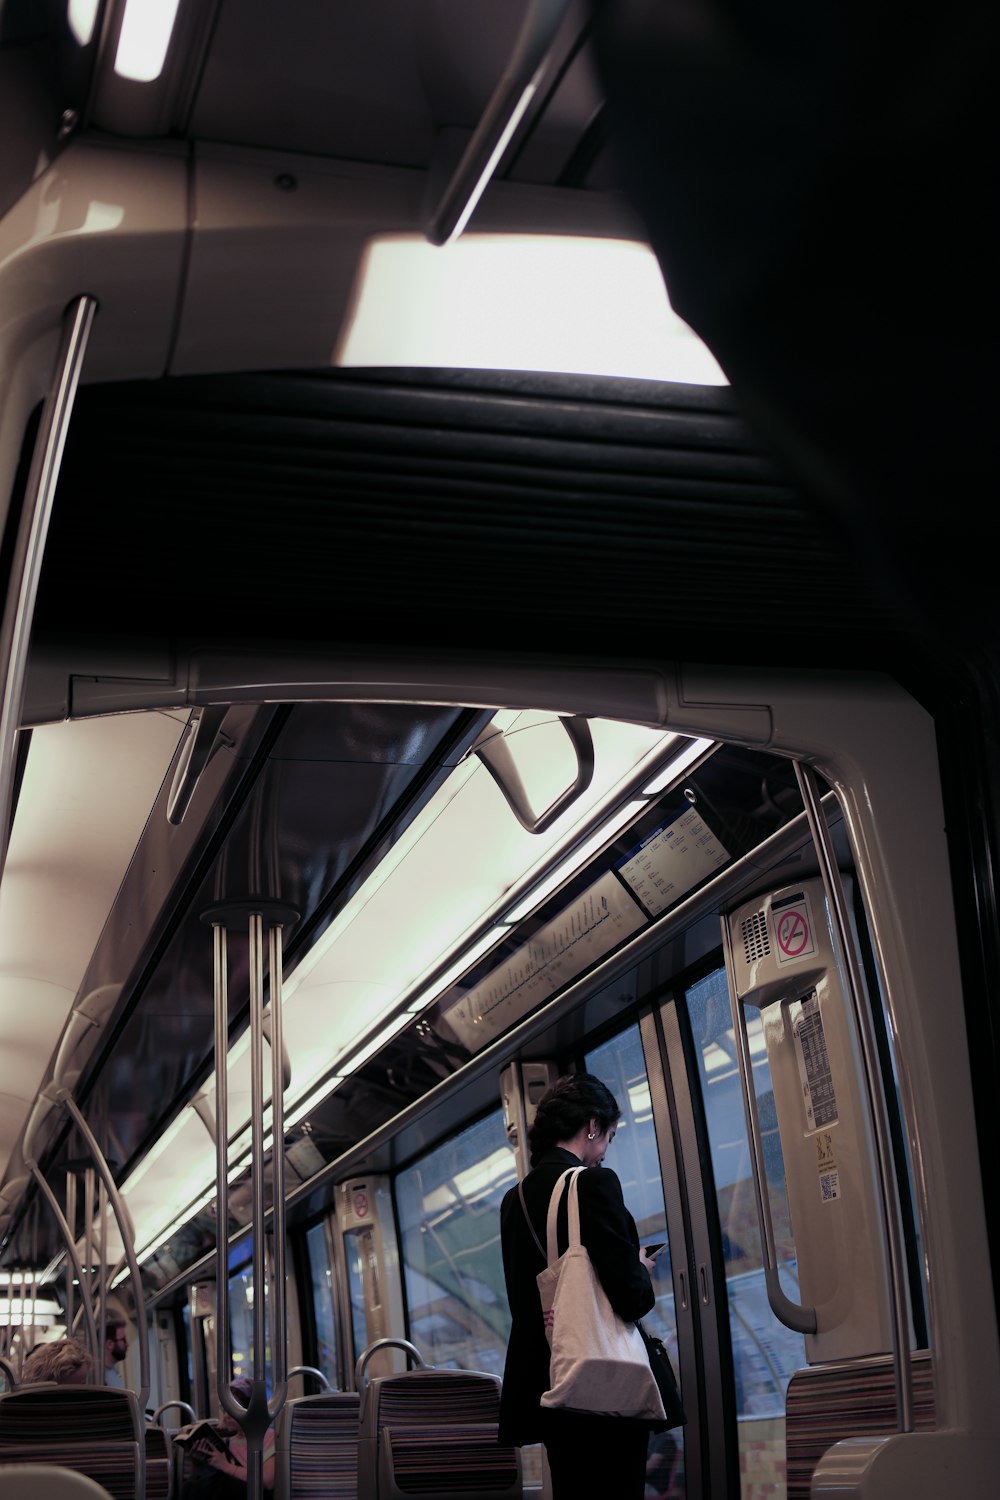 a woman is standing on a train looking at her cell phone